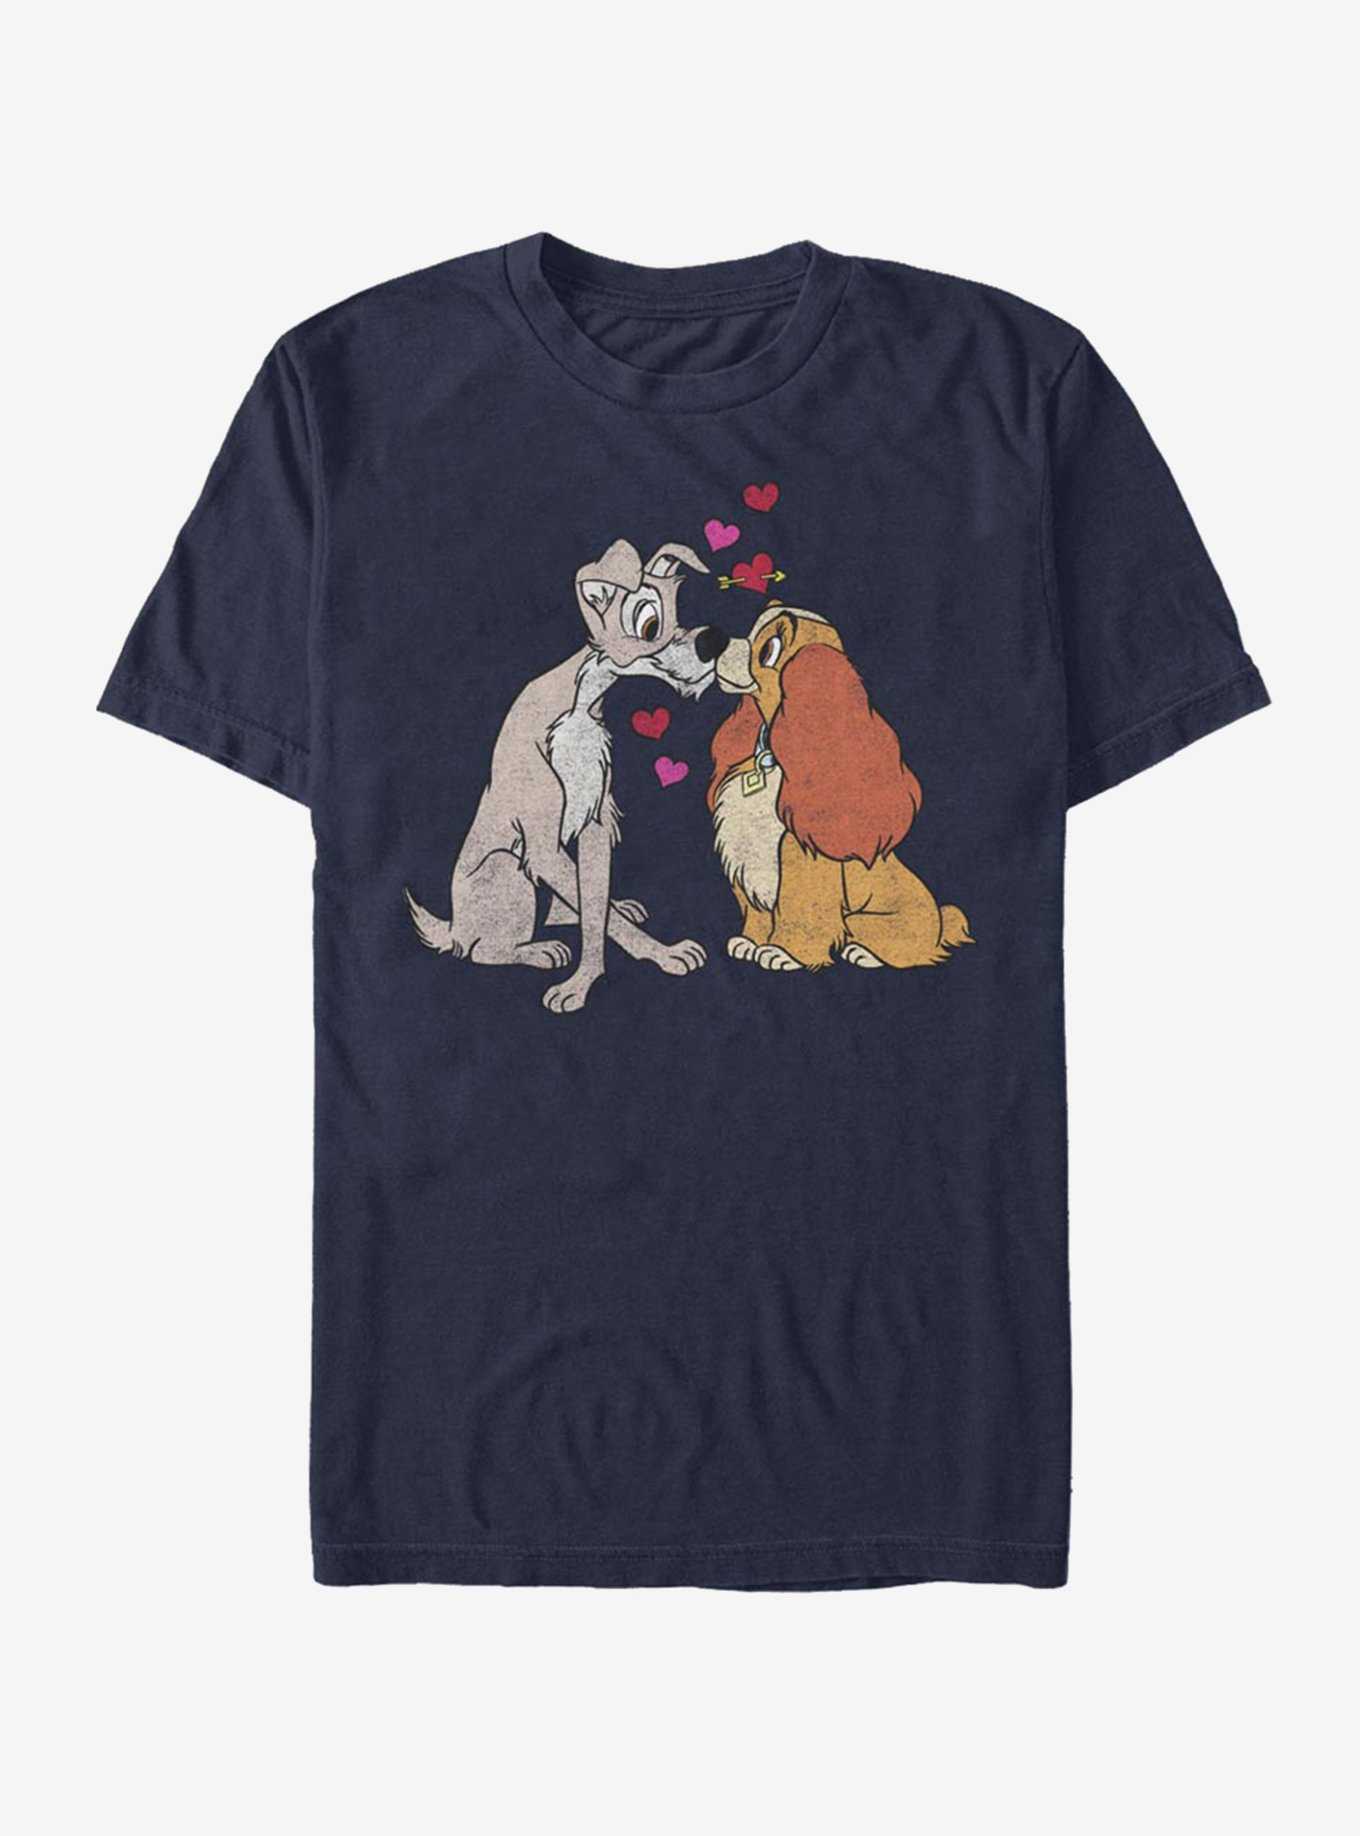 Disney Lady And The Tramp Puppy Love T-Shirt, , hi-res